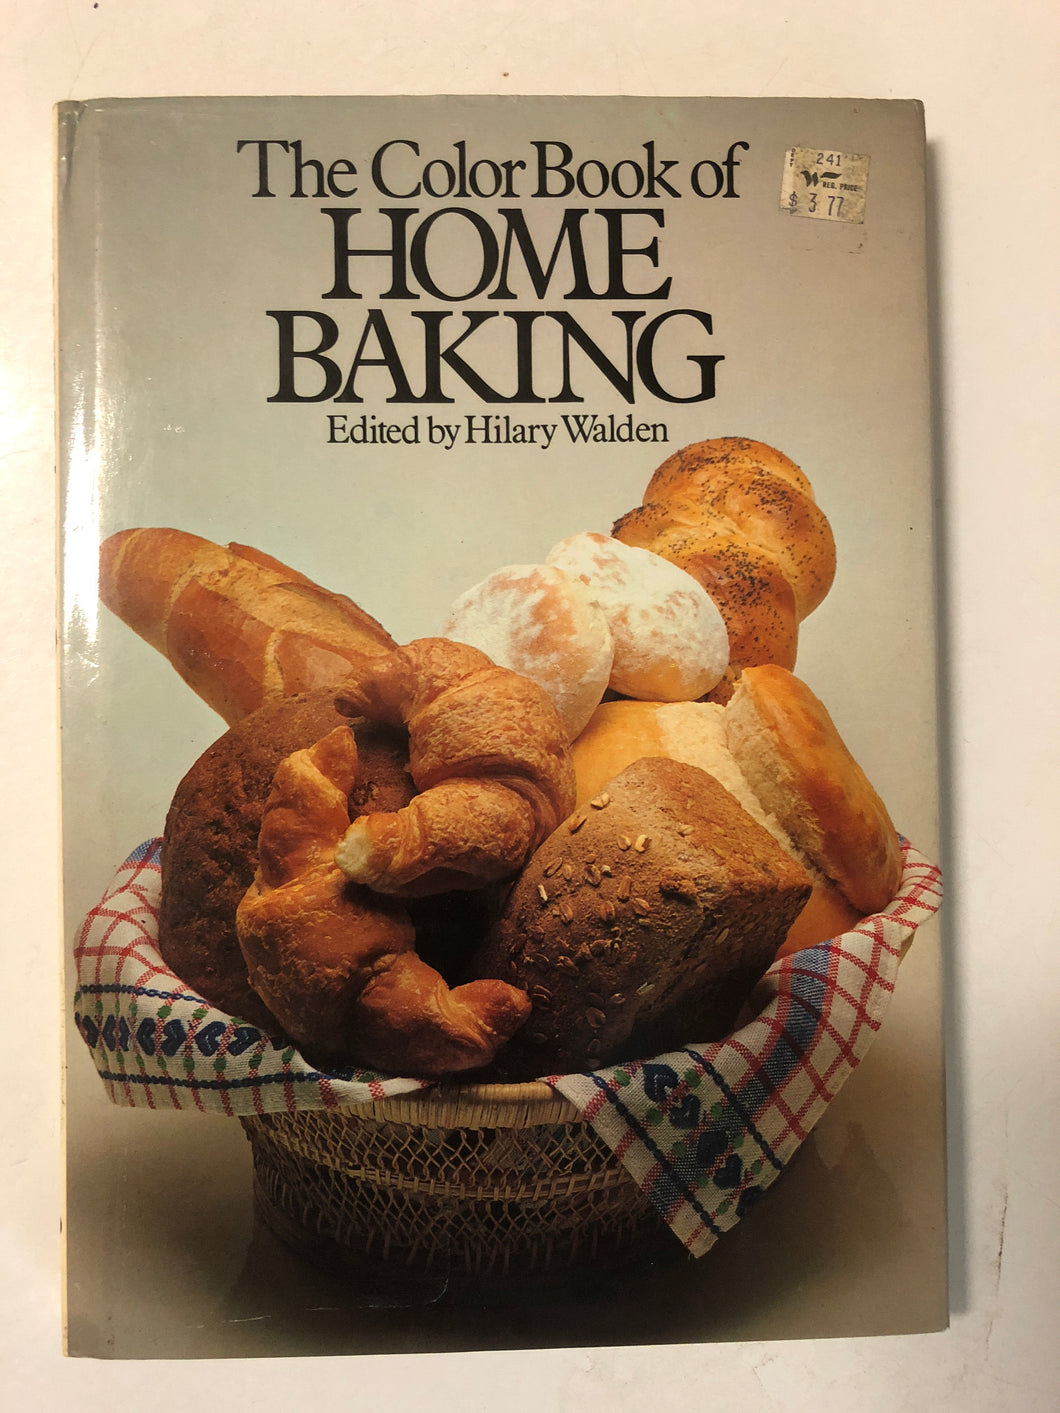 The Color Book of Home Baking - Slick Cat Books 